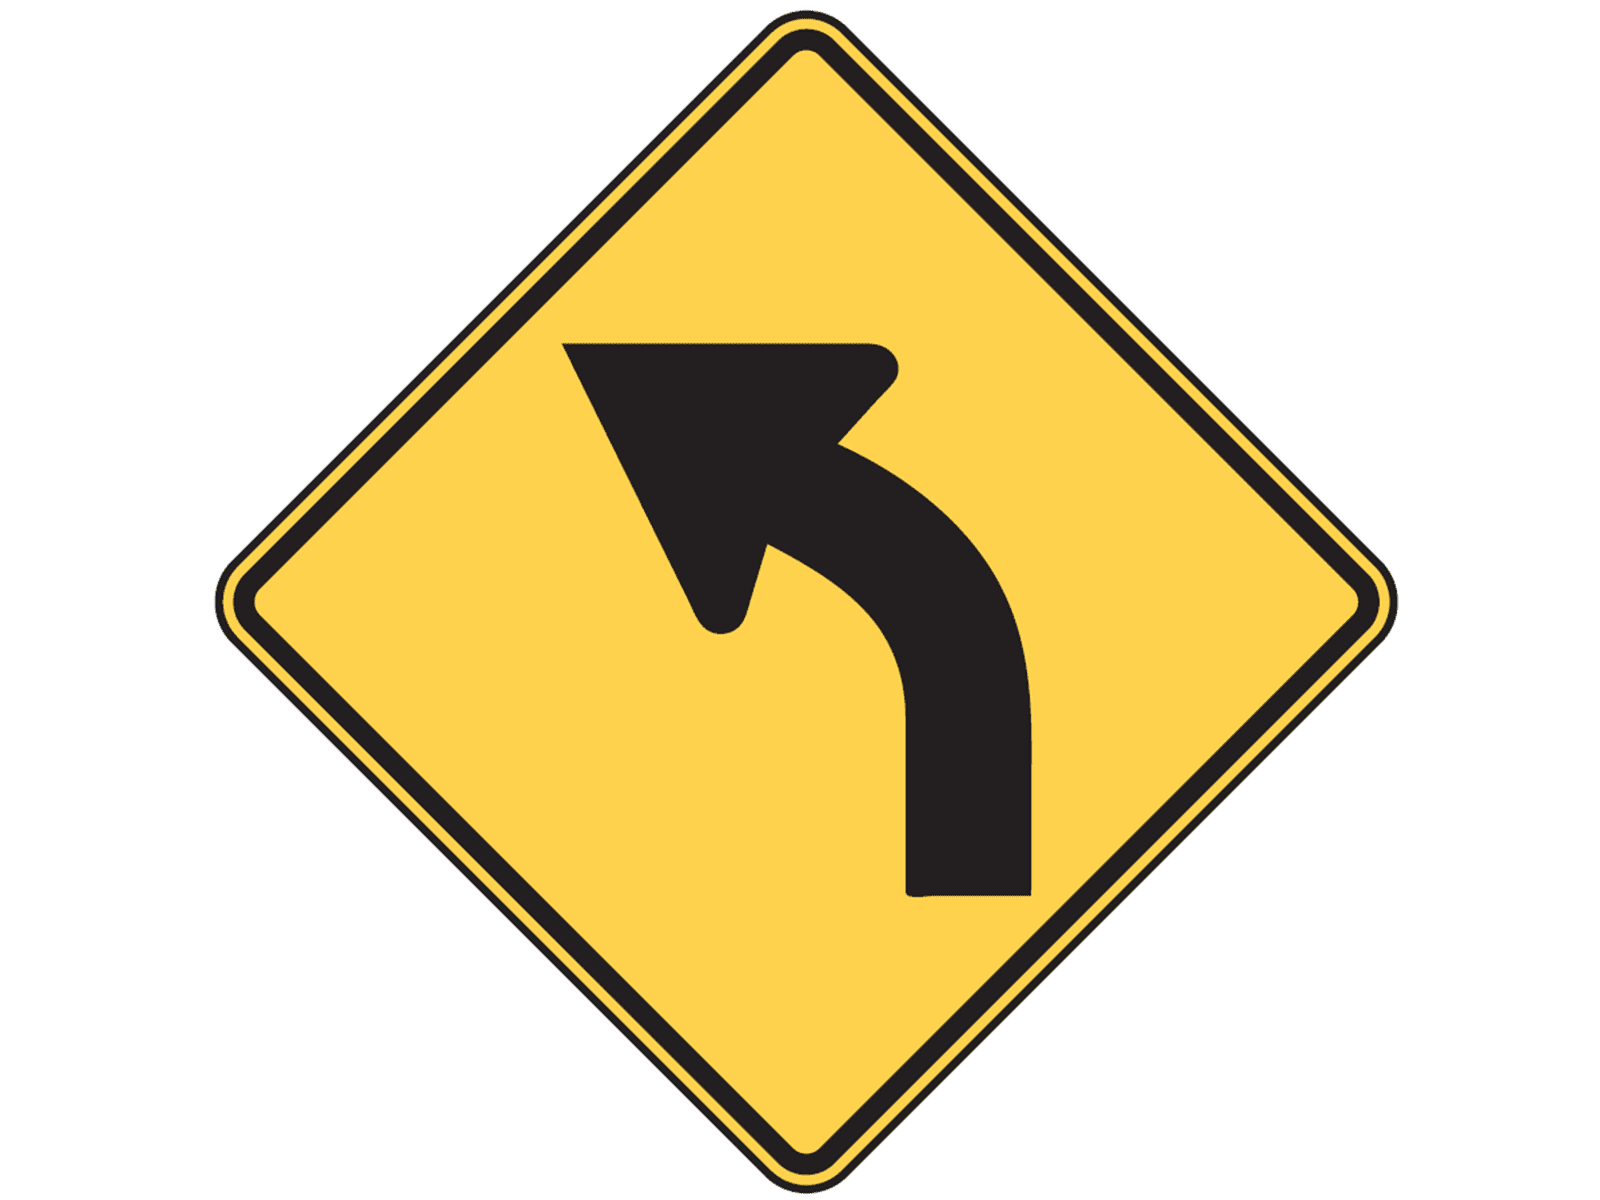 Left Curve. W1-2 - W1: Curves and Turns